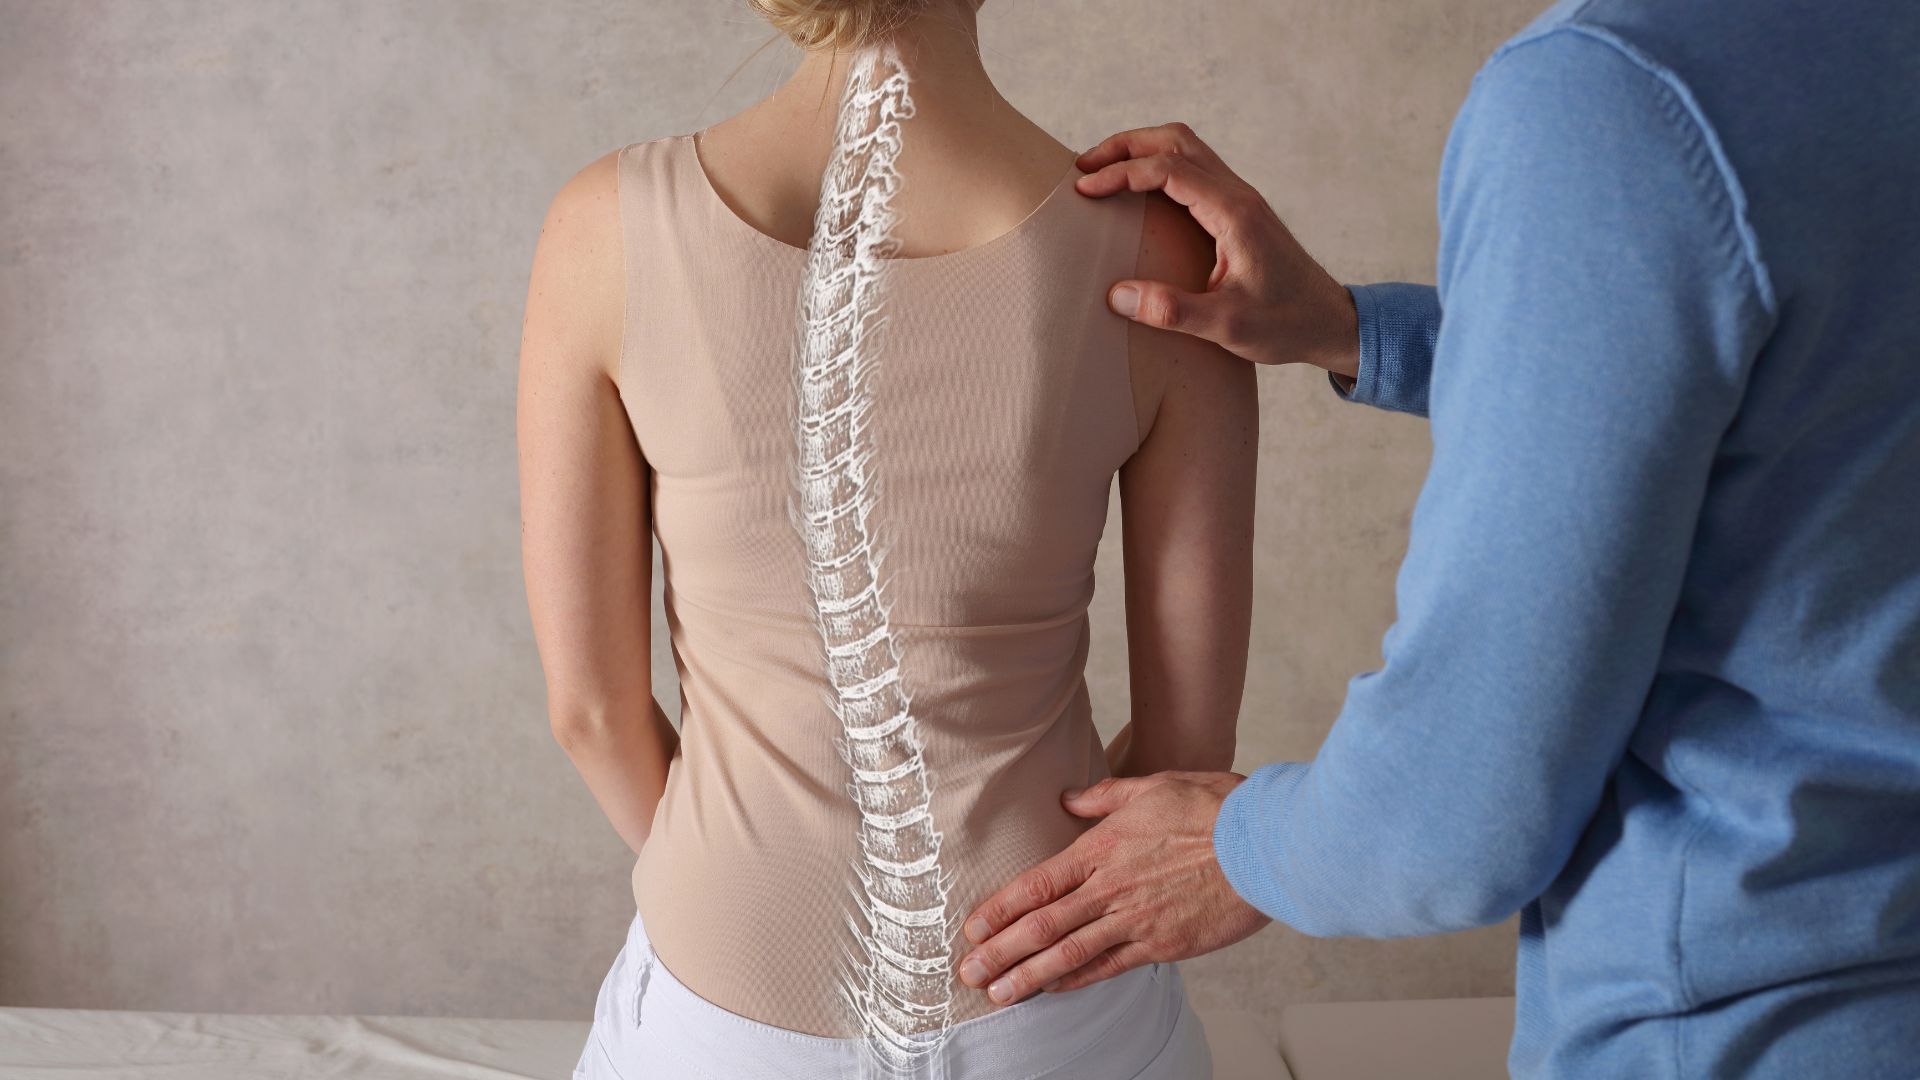 Can A Chiropractor Help With Scoliosis?